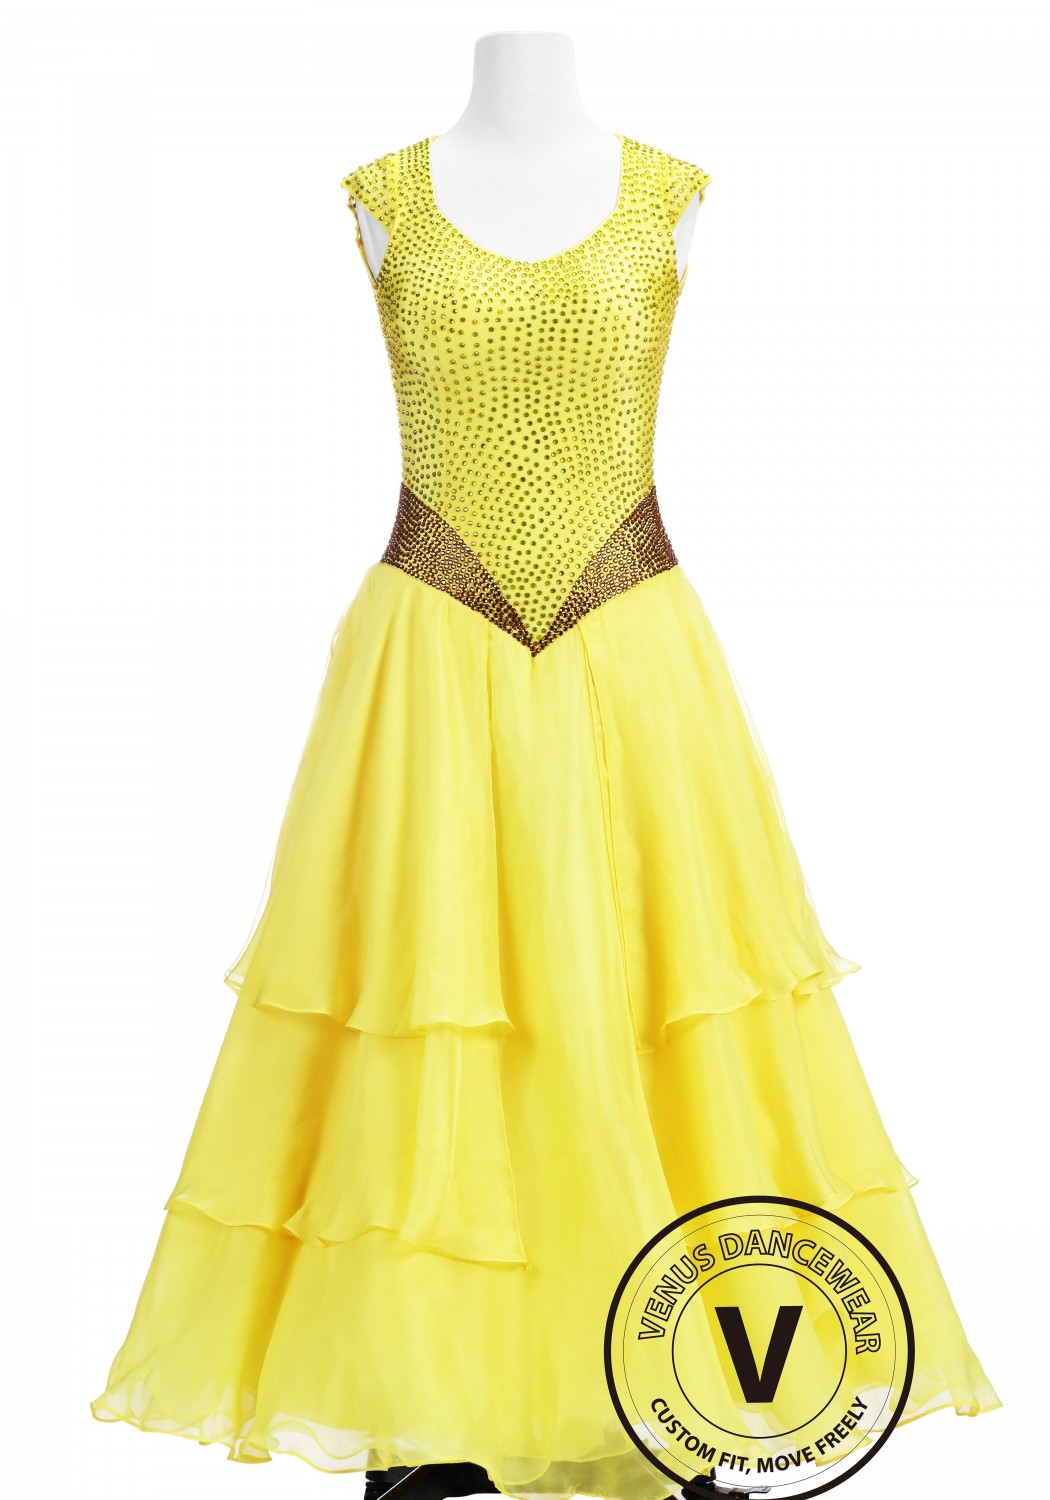 The Beauty Yellow Ballroom Competition Dance Dress